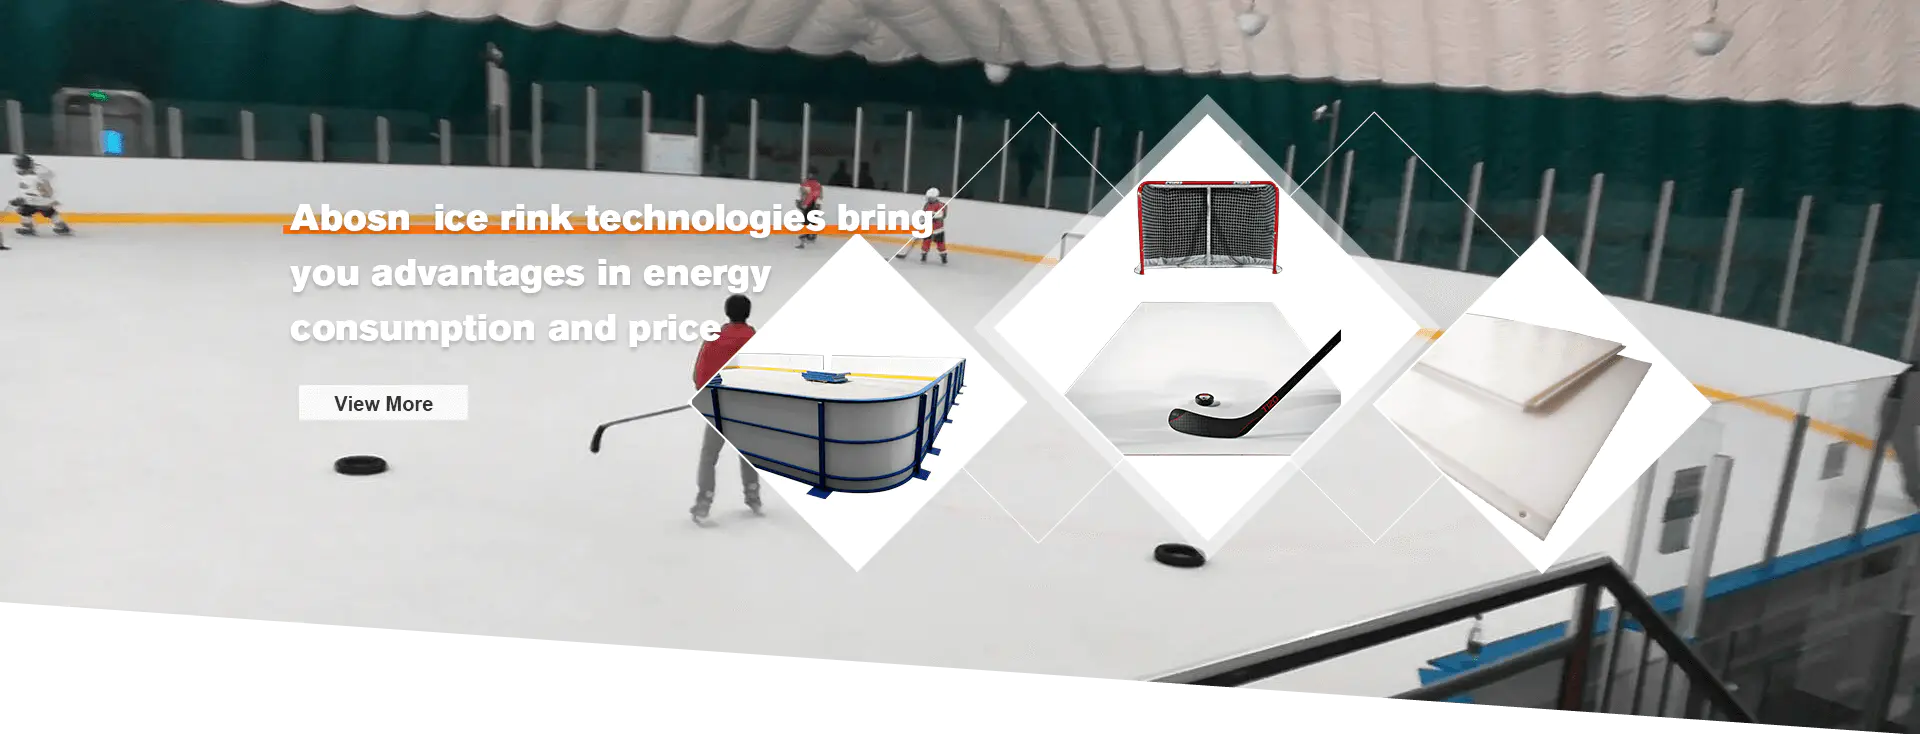 Abosn ice rink technologies bring you advantages in energy consumption and price